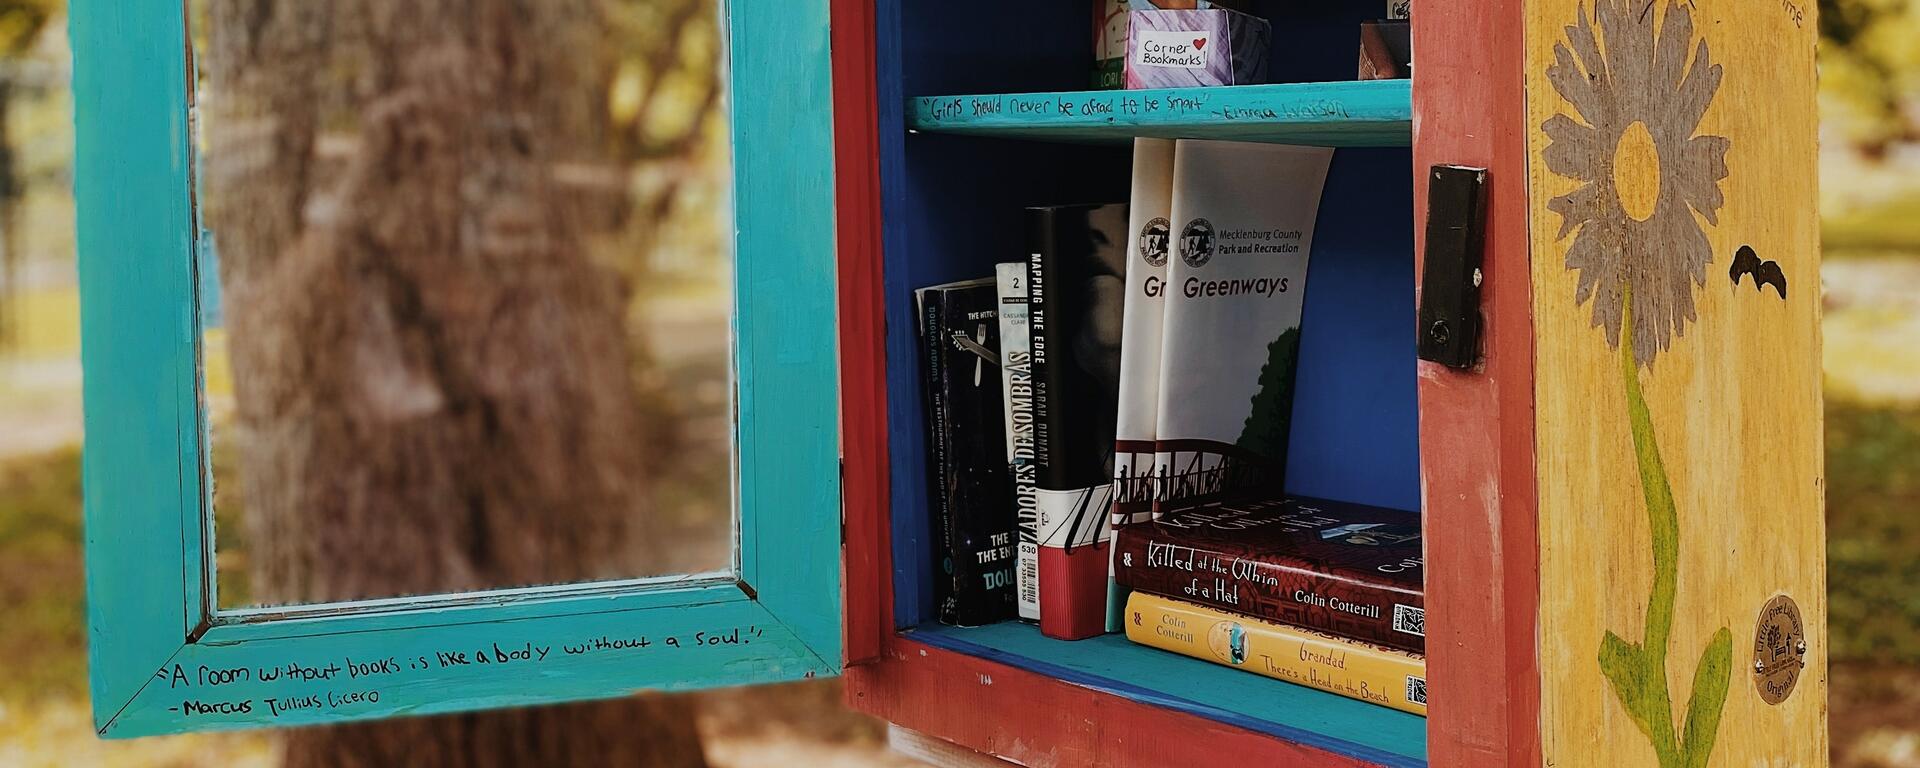 A small wooden bird house filled with free books 